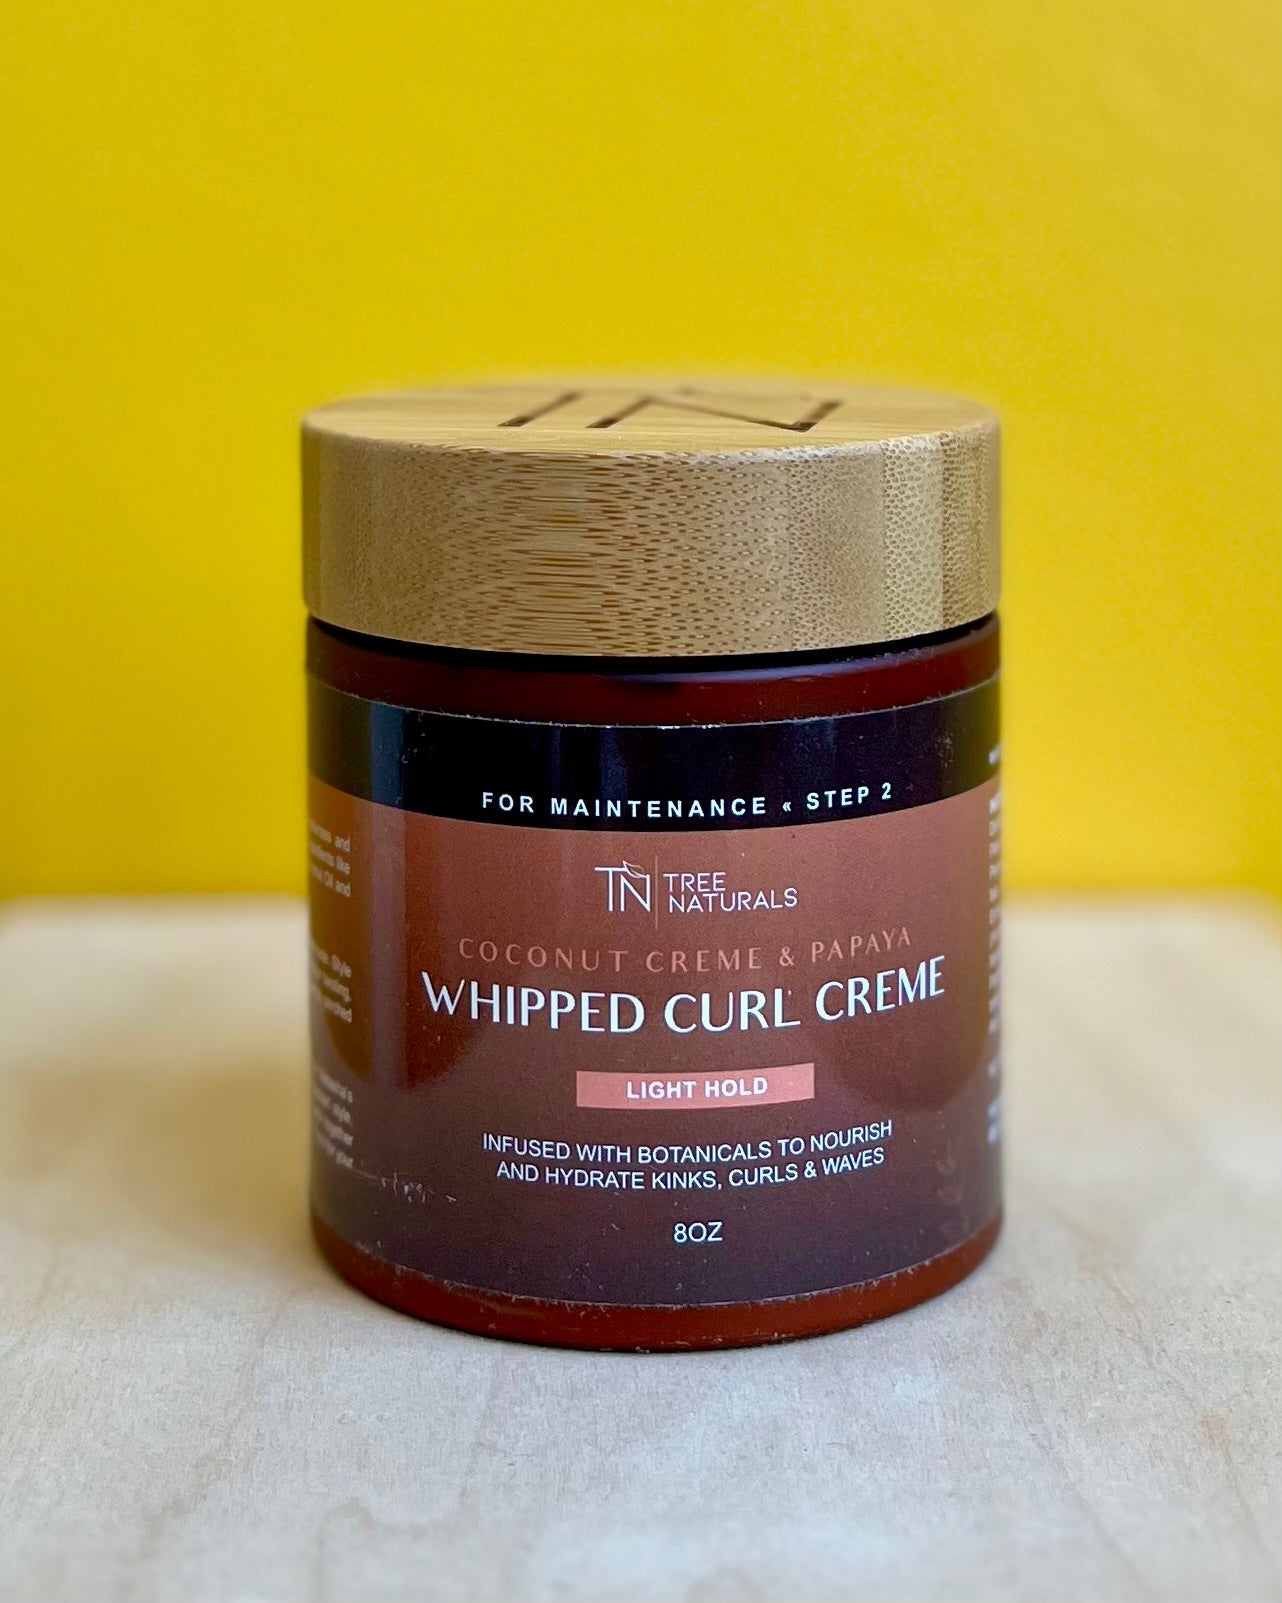 Whipped Curl Crème Tree Naturals